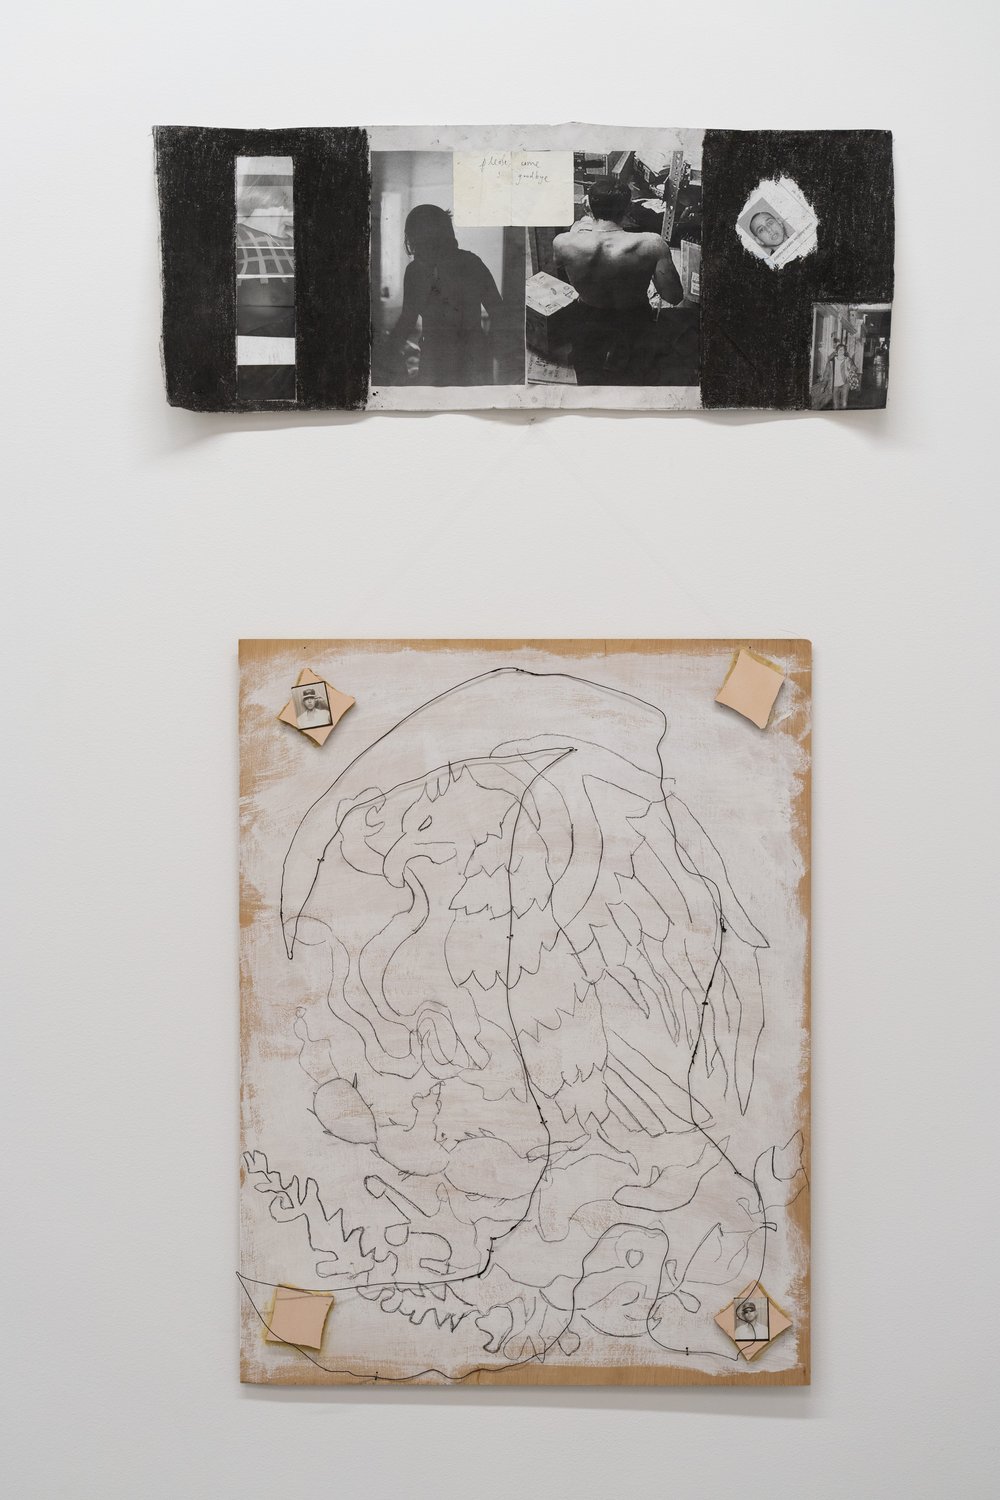  Top: Joseph Rayo, Please Come Say Goodbye , 2020. Inkjet print, silver gelatin print, charcoal, pen on canvas, 12 ½ x 33 inches.   Bottom: Joseph Rayo,  Pops Botas , 2022. Tile, wire, charcoal, and acrylic on wood panel, 34 x 26 inches.&nbsp;  Both 